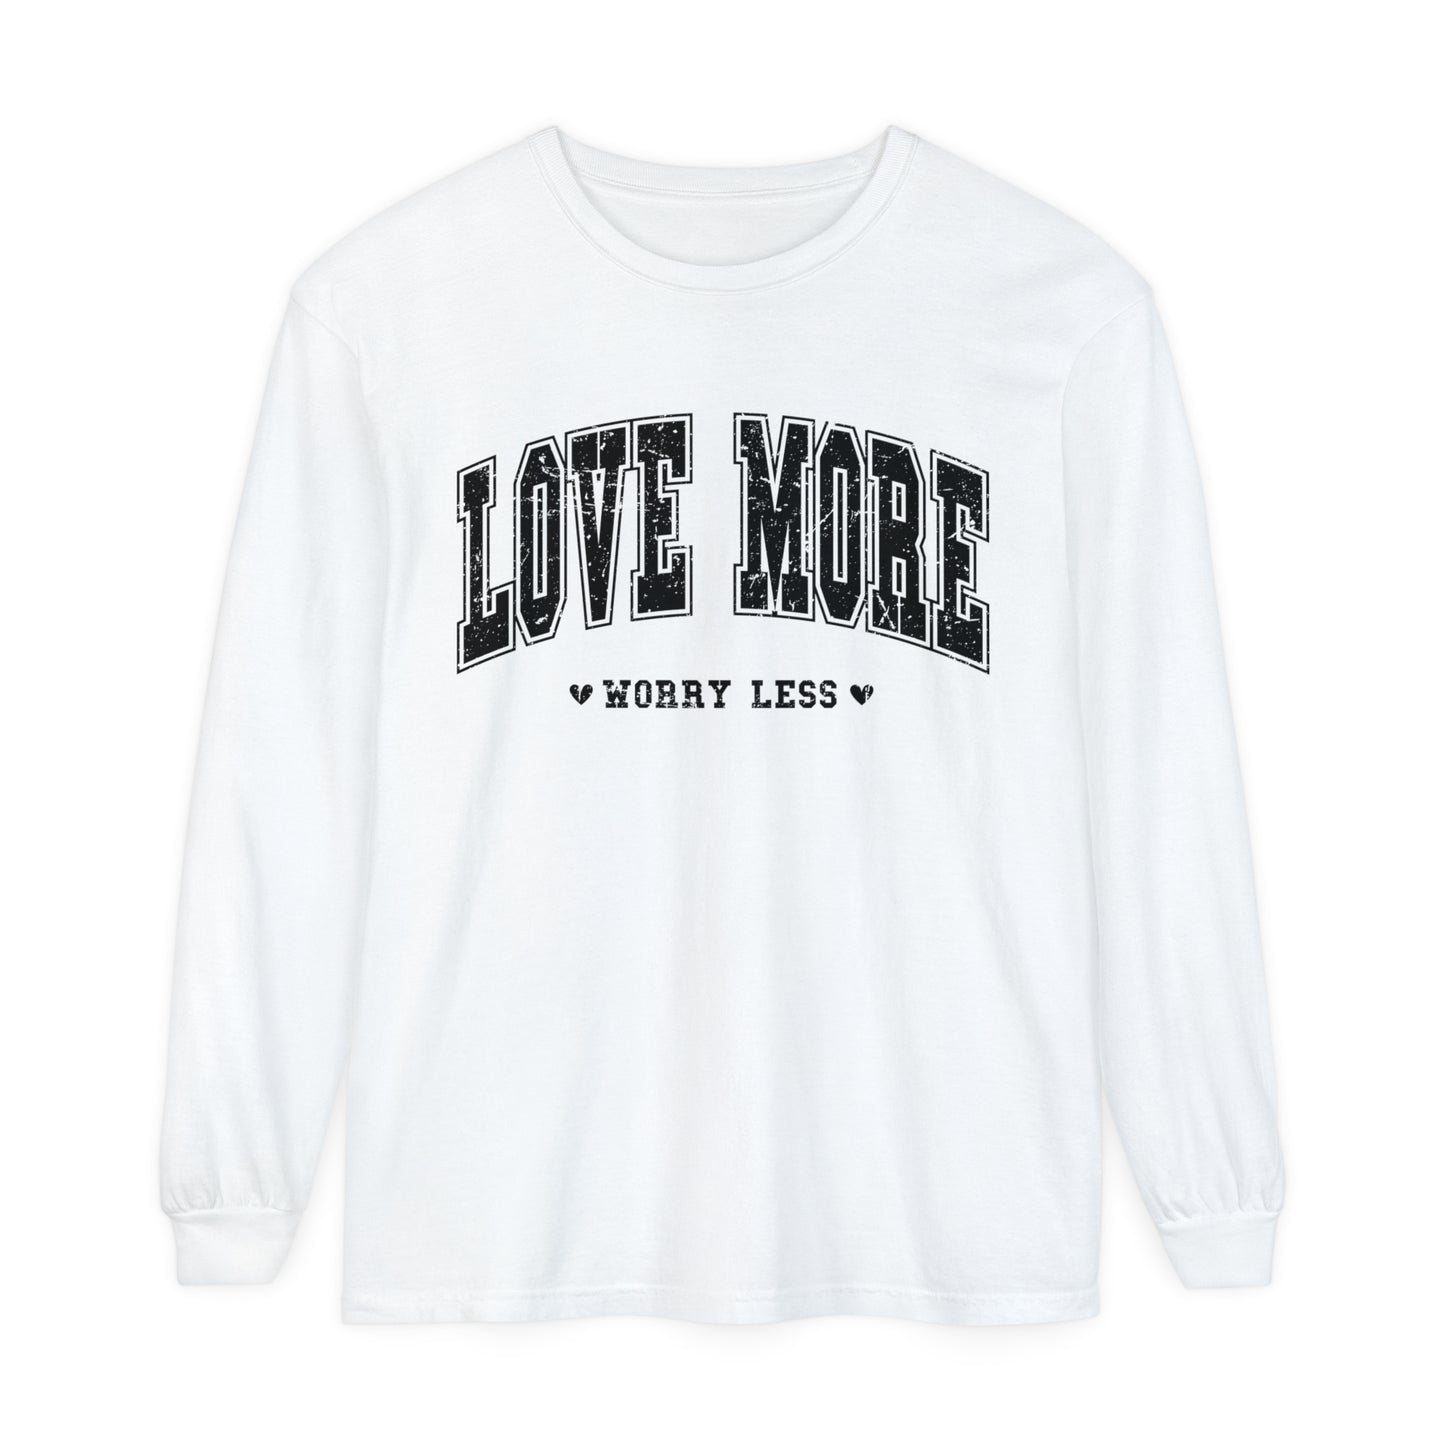 Love More Worry Less Women's Loose Long Sleeve T-Shirt